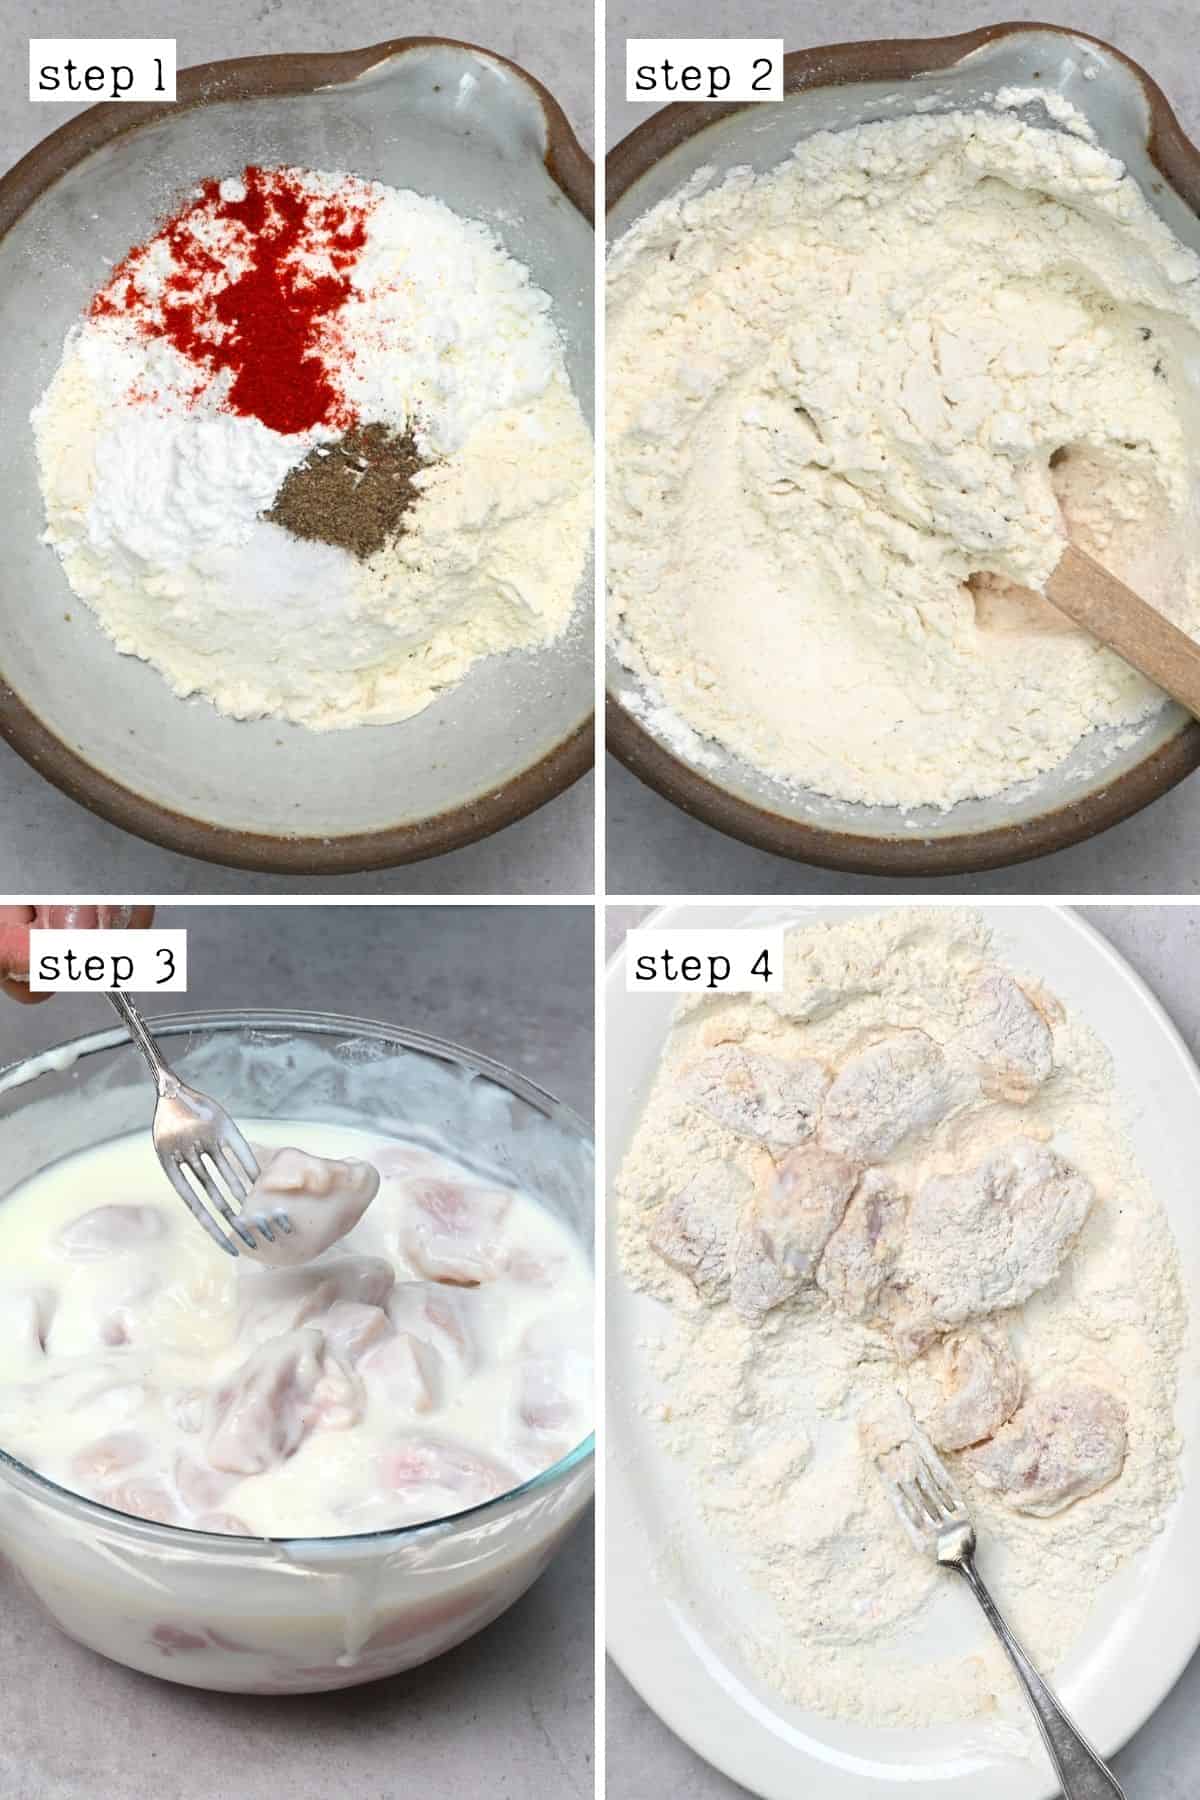 Steps for coating marinated chicken cubes in flour